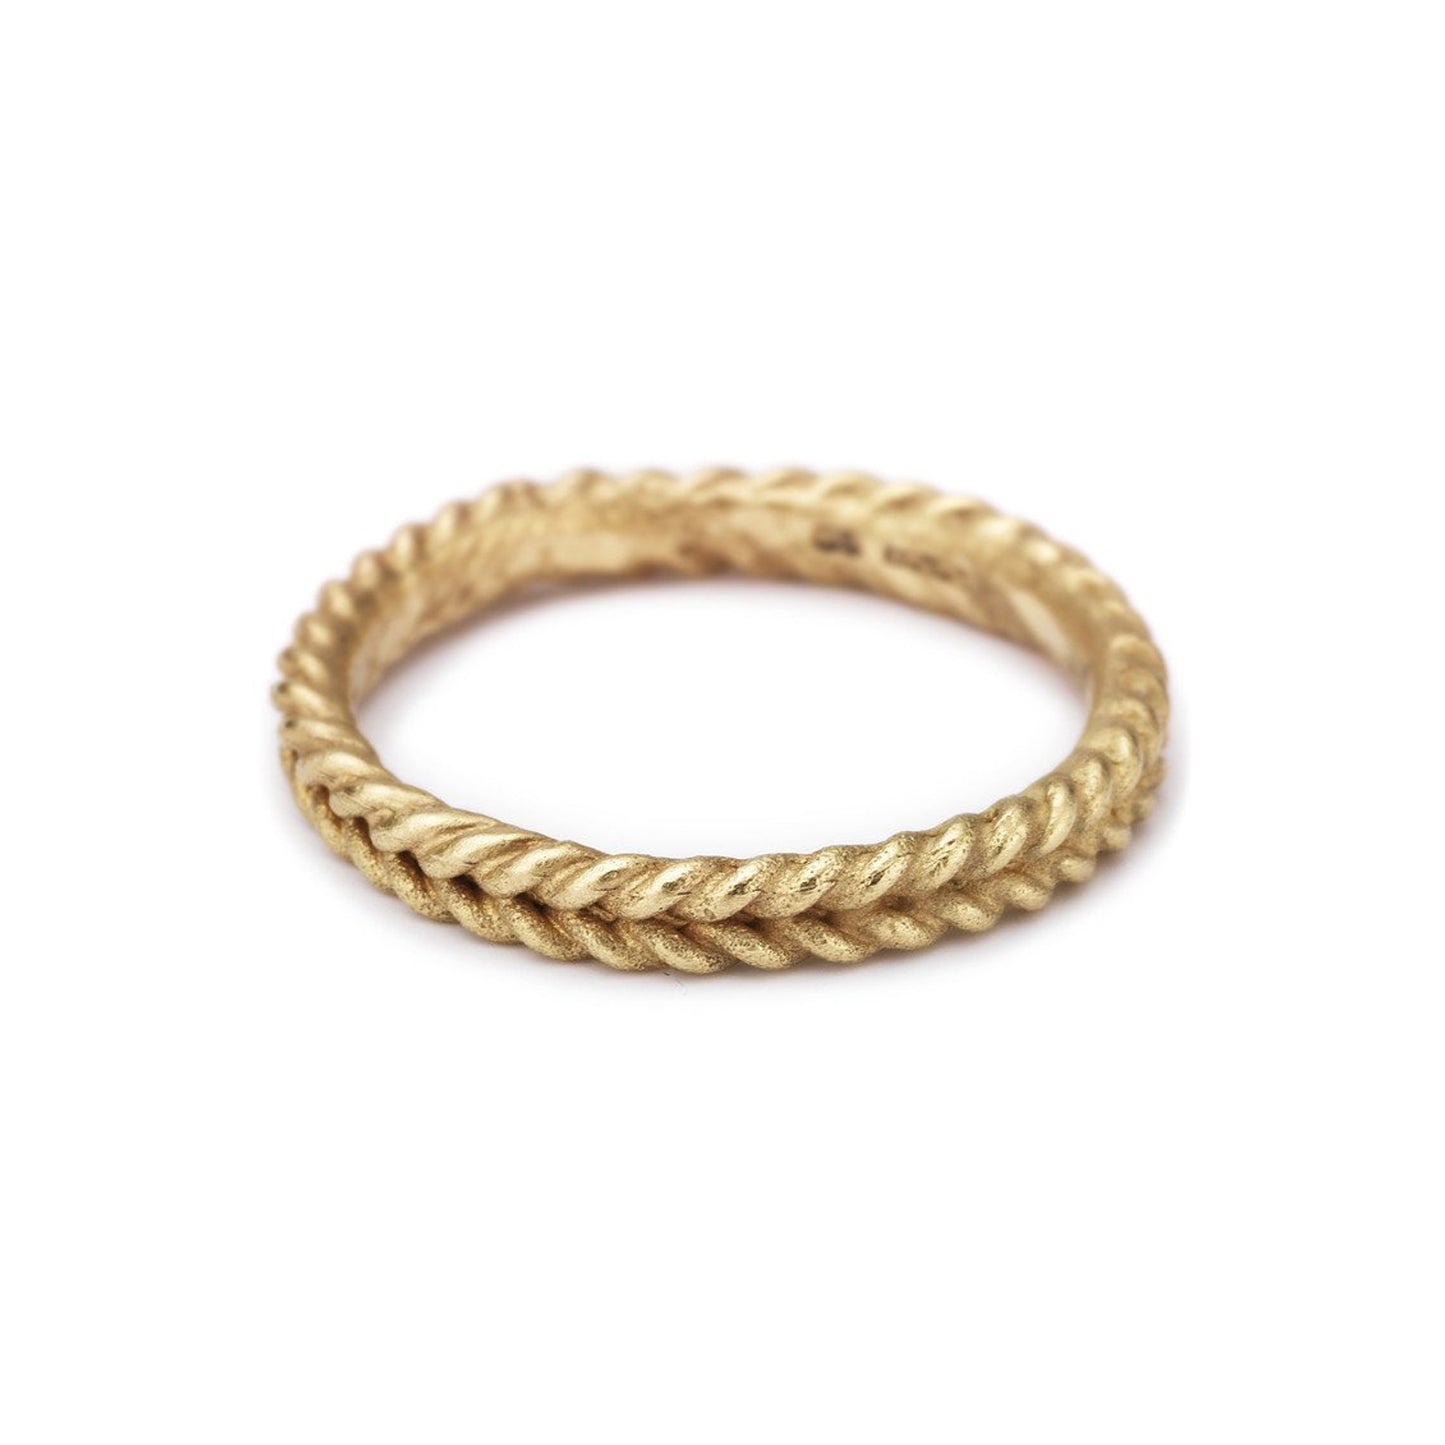  14ct brushed yellow gold Ruth Tomlinson double rope plaited band ring. Alternative wedding ring.